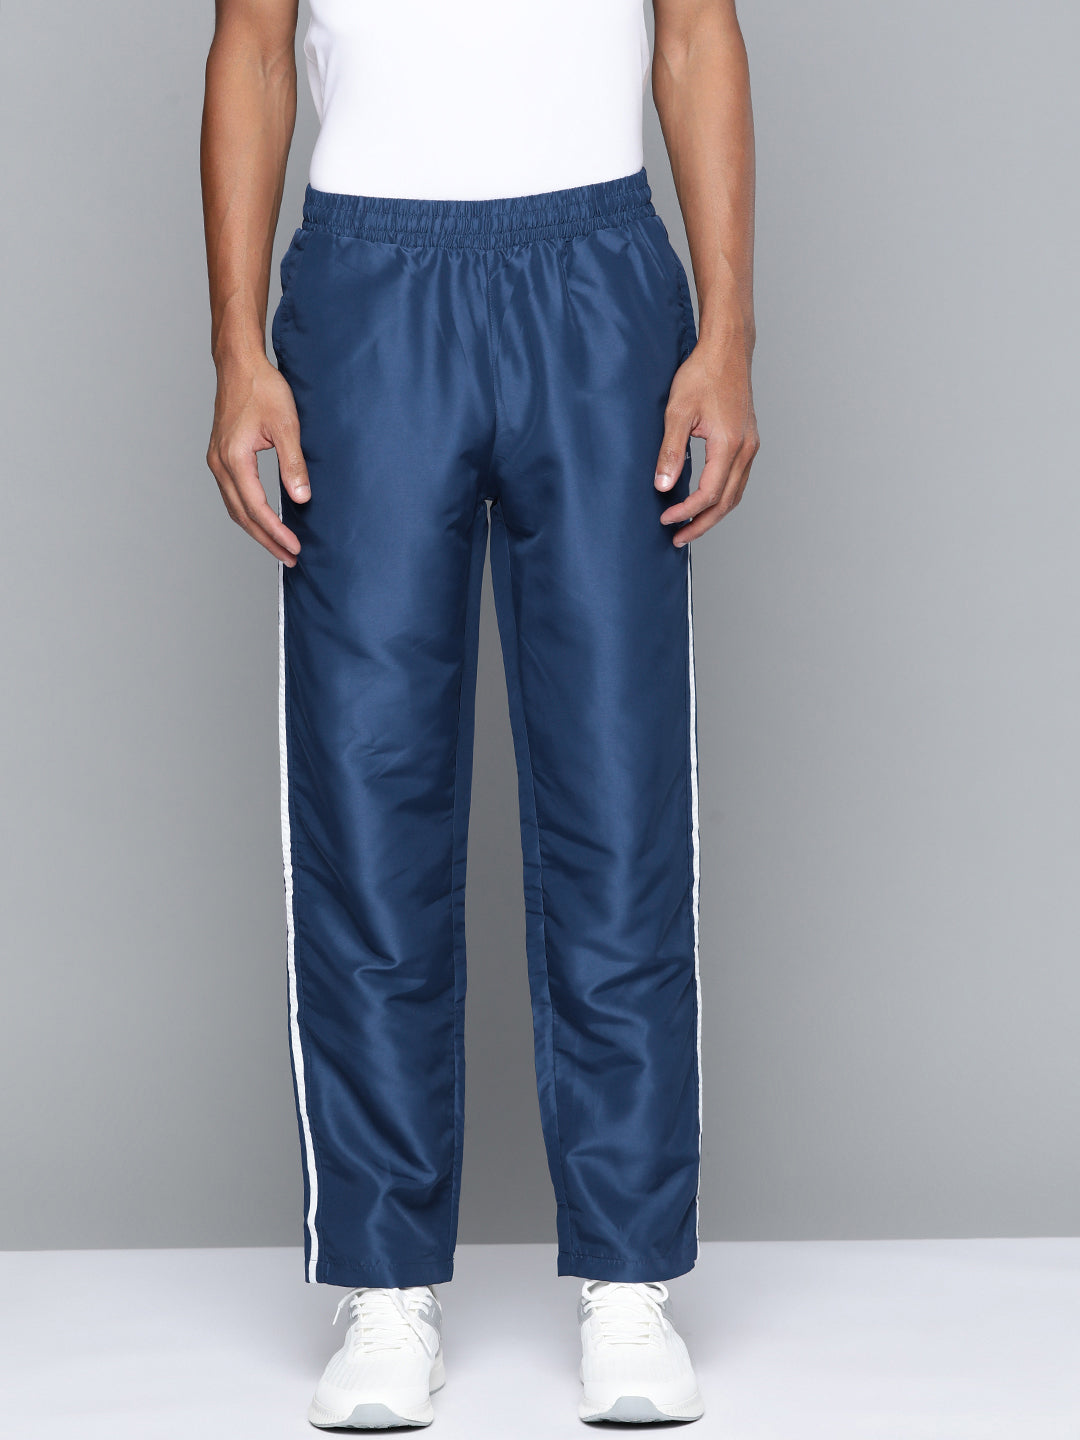 Alcis Men Blue and White Track Pants